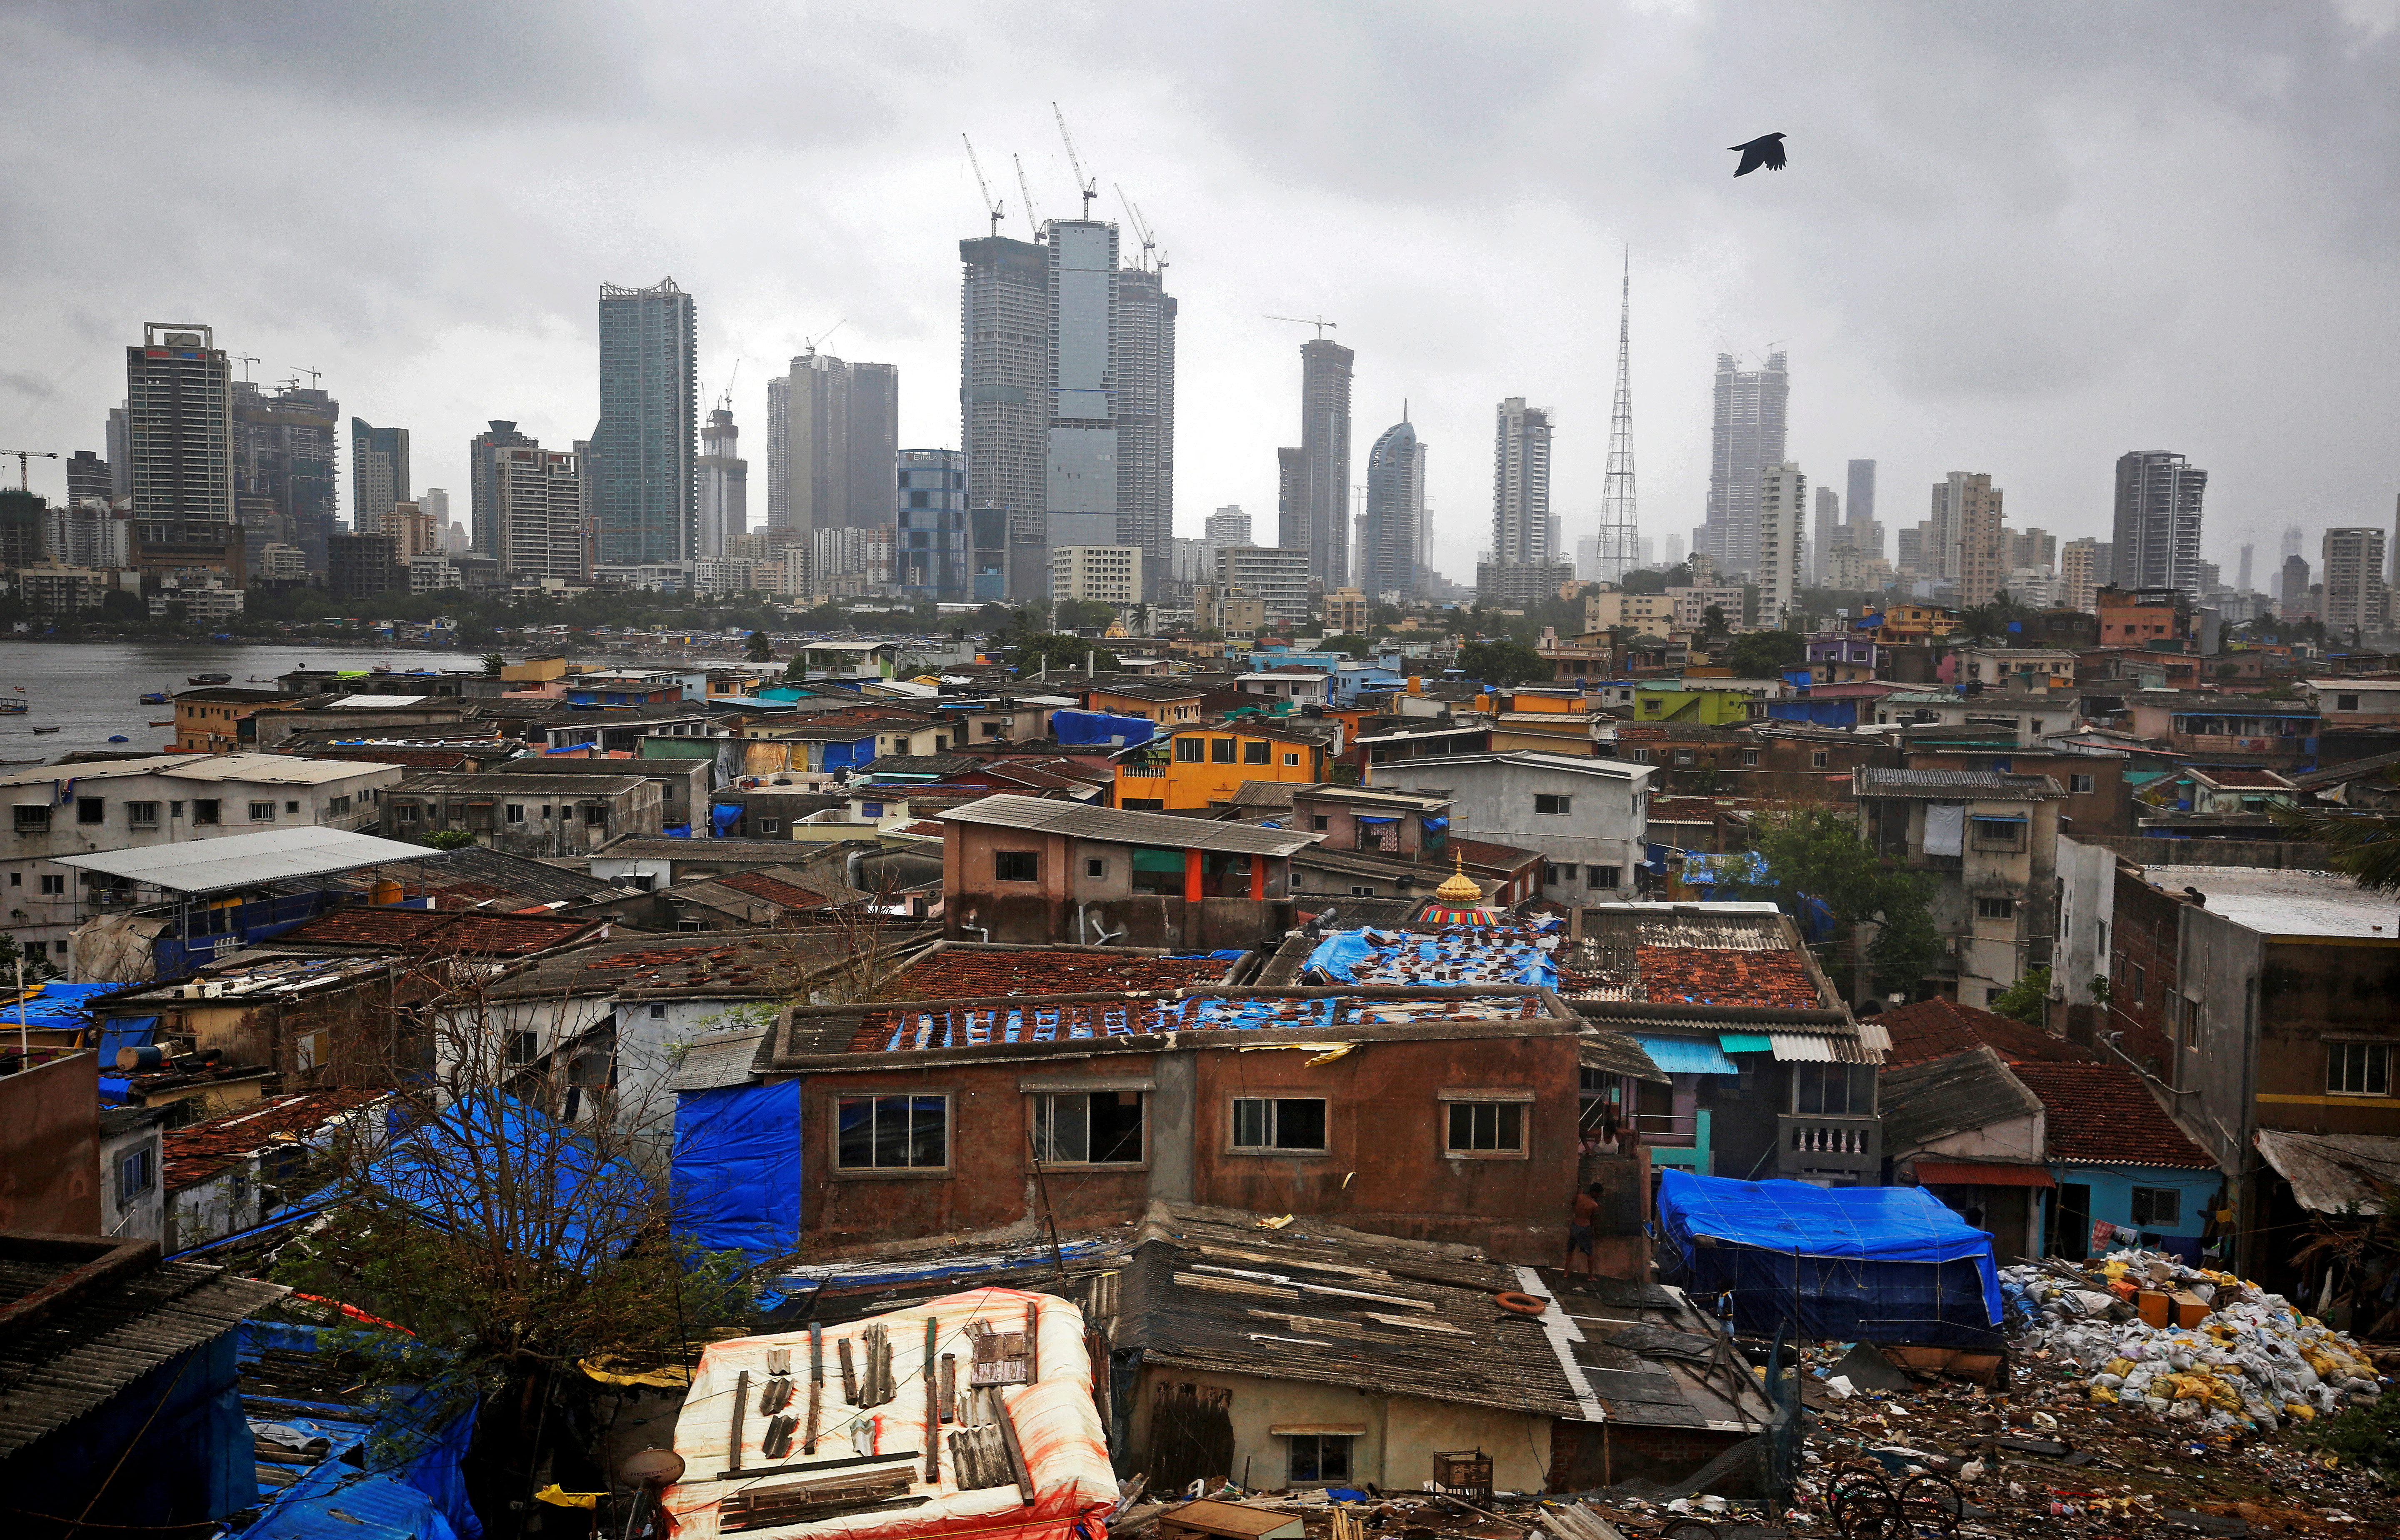 The towers that rise in the thriving financial center of Mumbai contrast with the favelas that predominate in the urban landscape (REUTERS / Francis Mascarenhas)